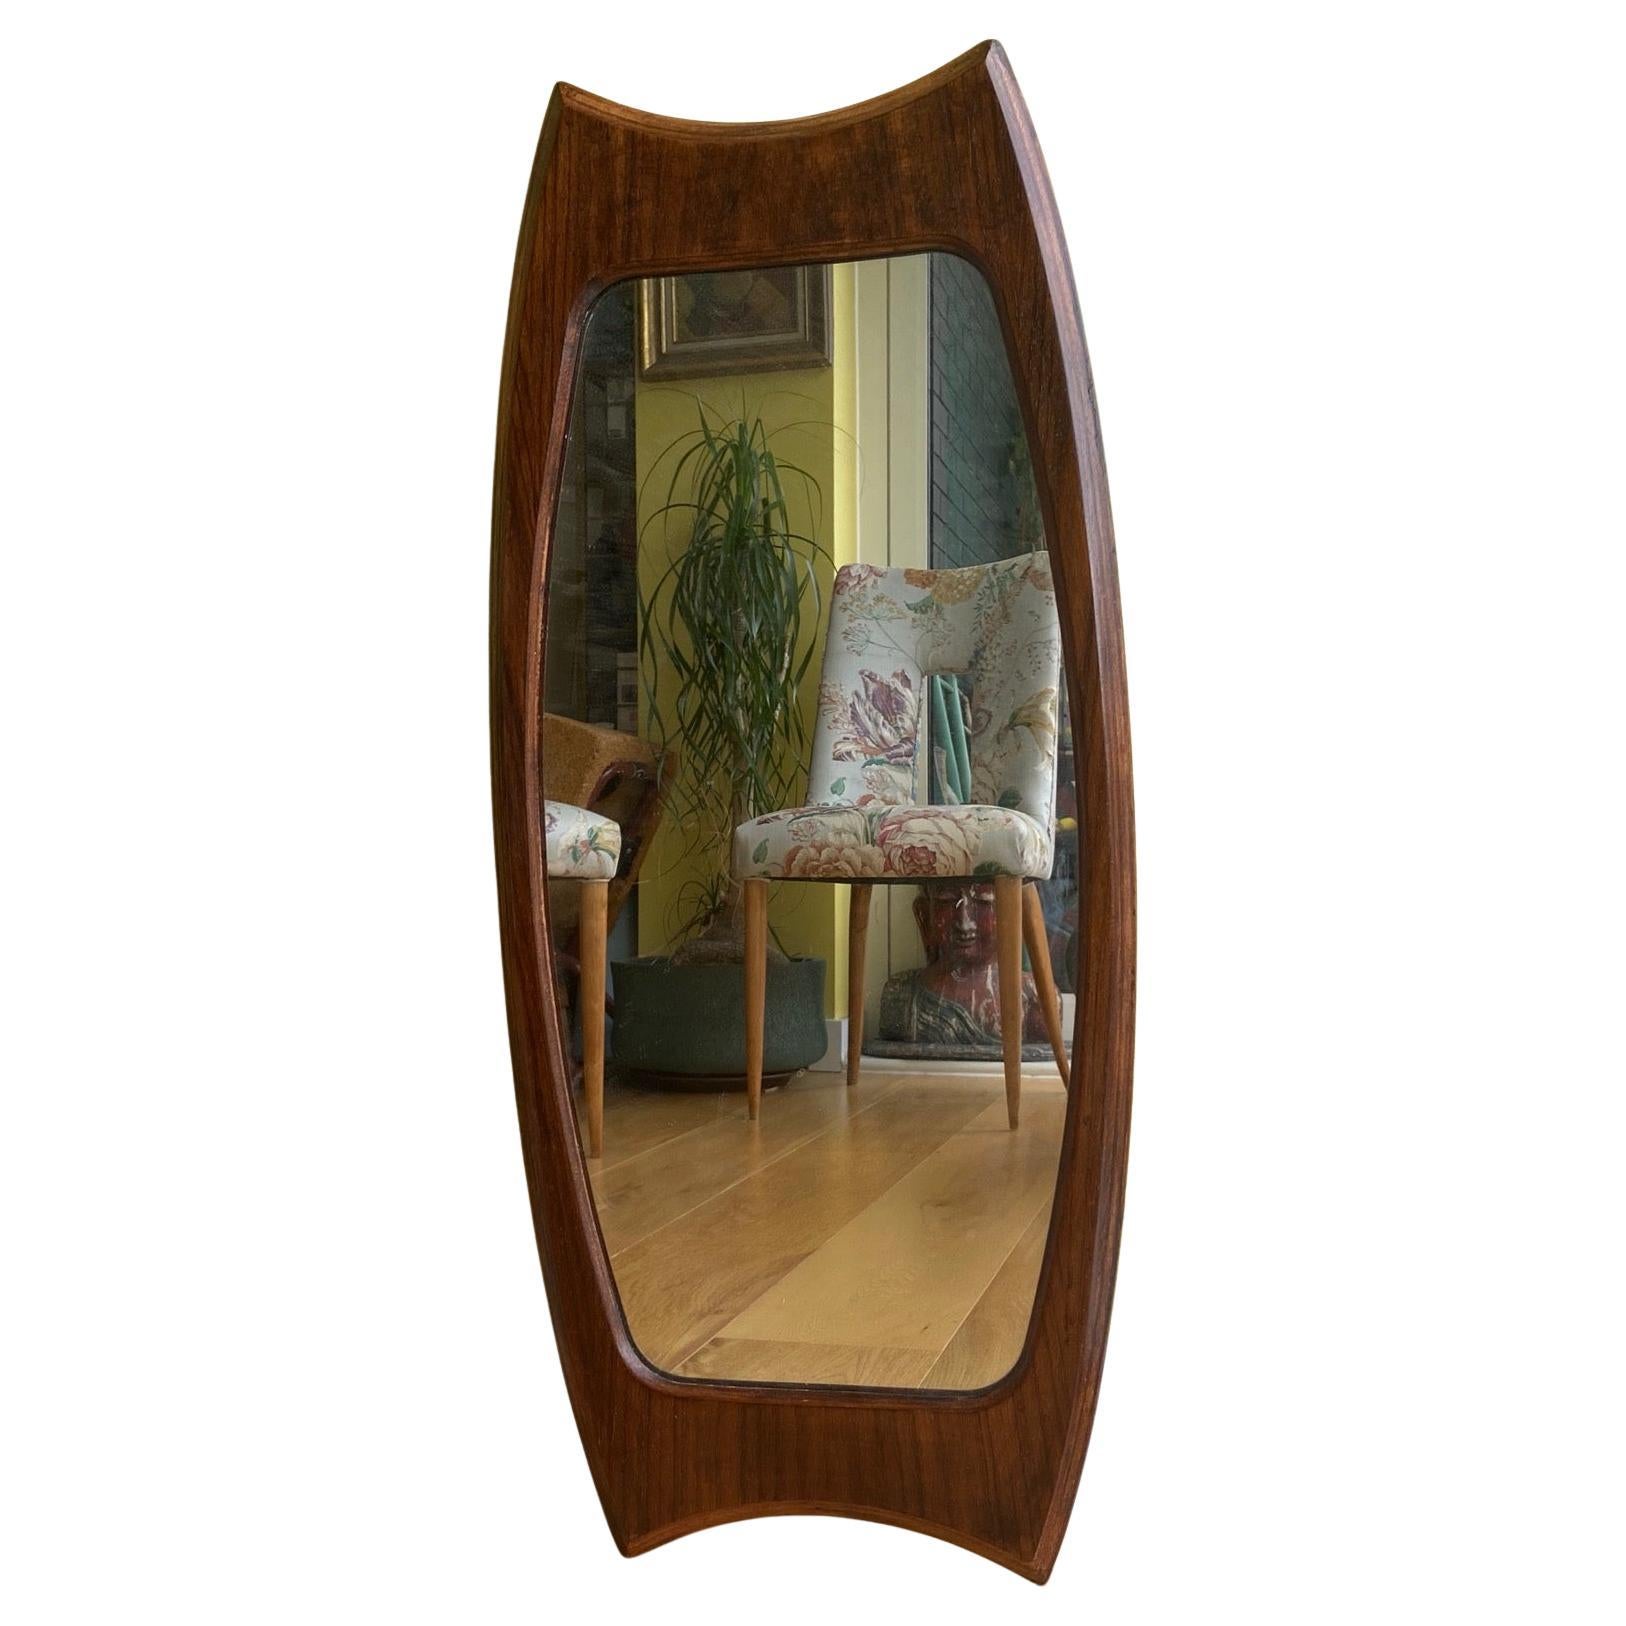 An elegant 1950s sculptured vertical Teak mirror, by Franco Campo and Carlo Graffi.